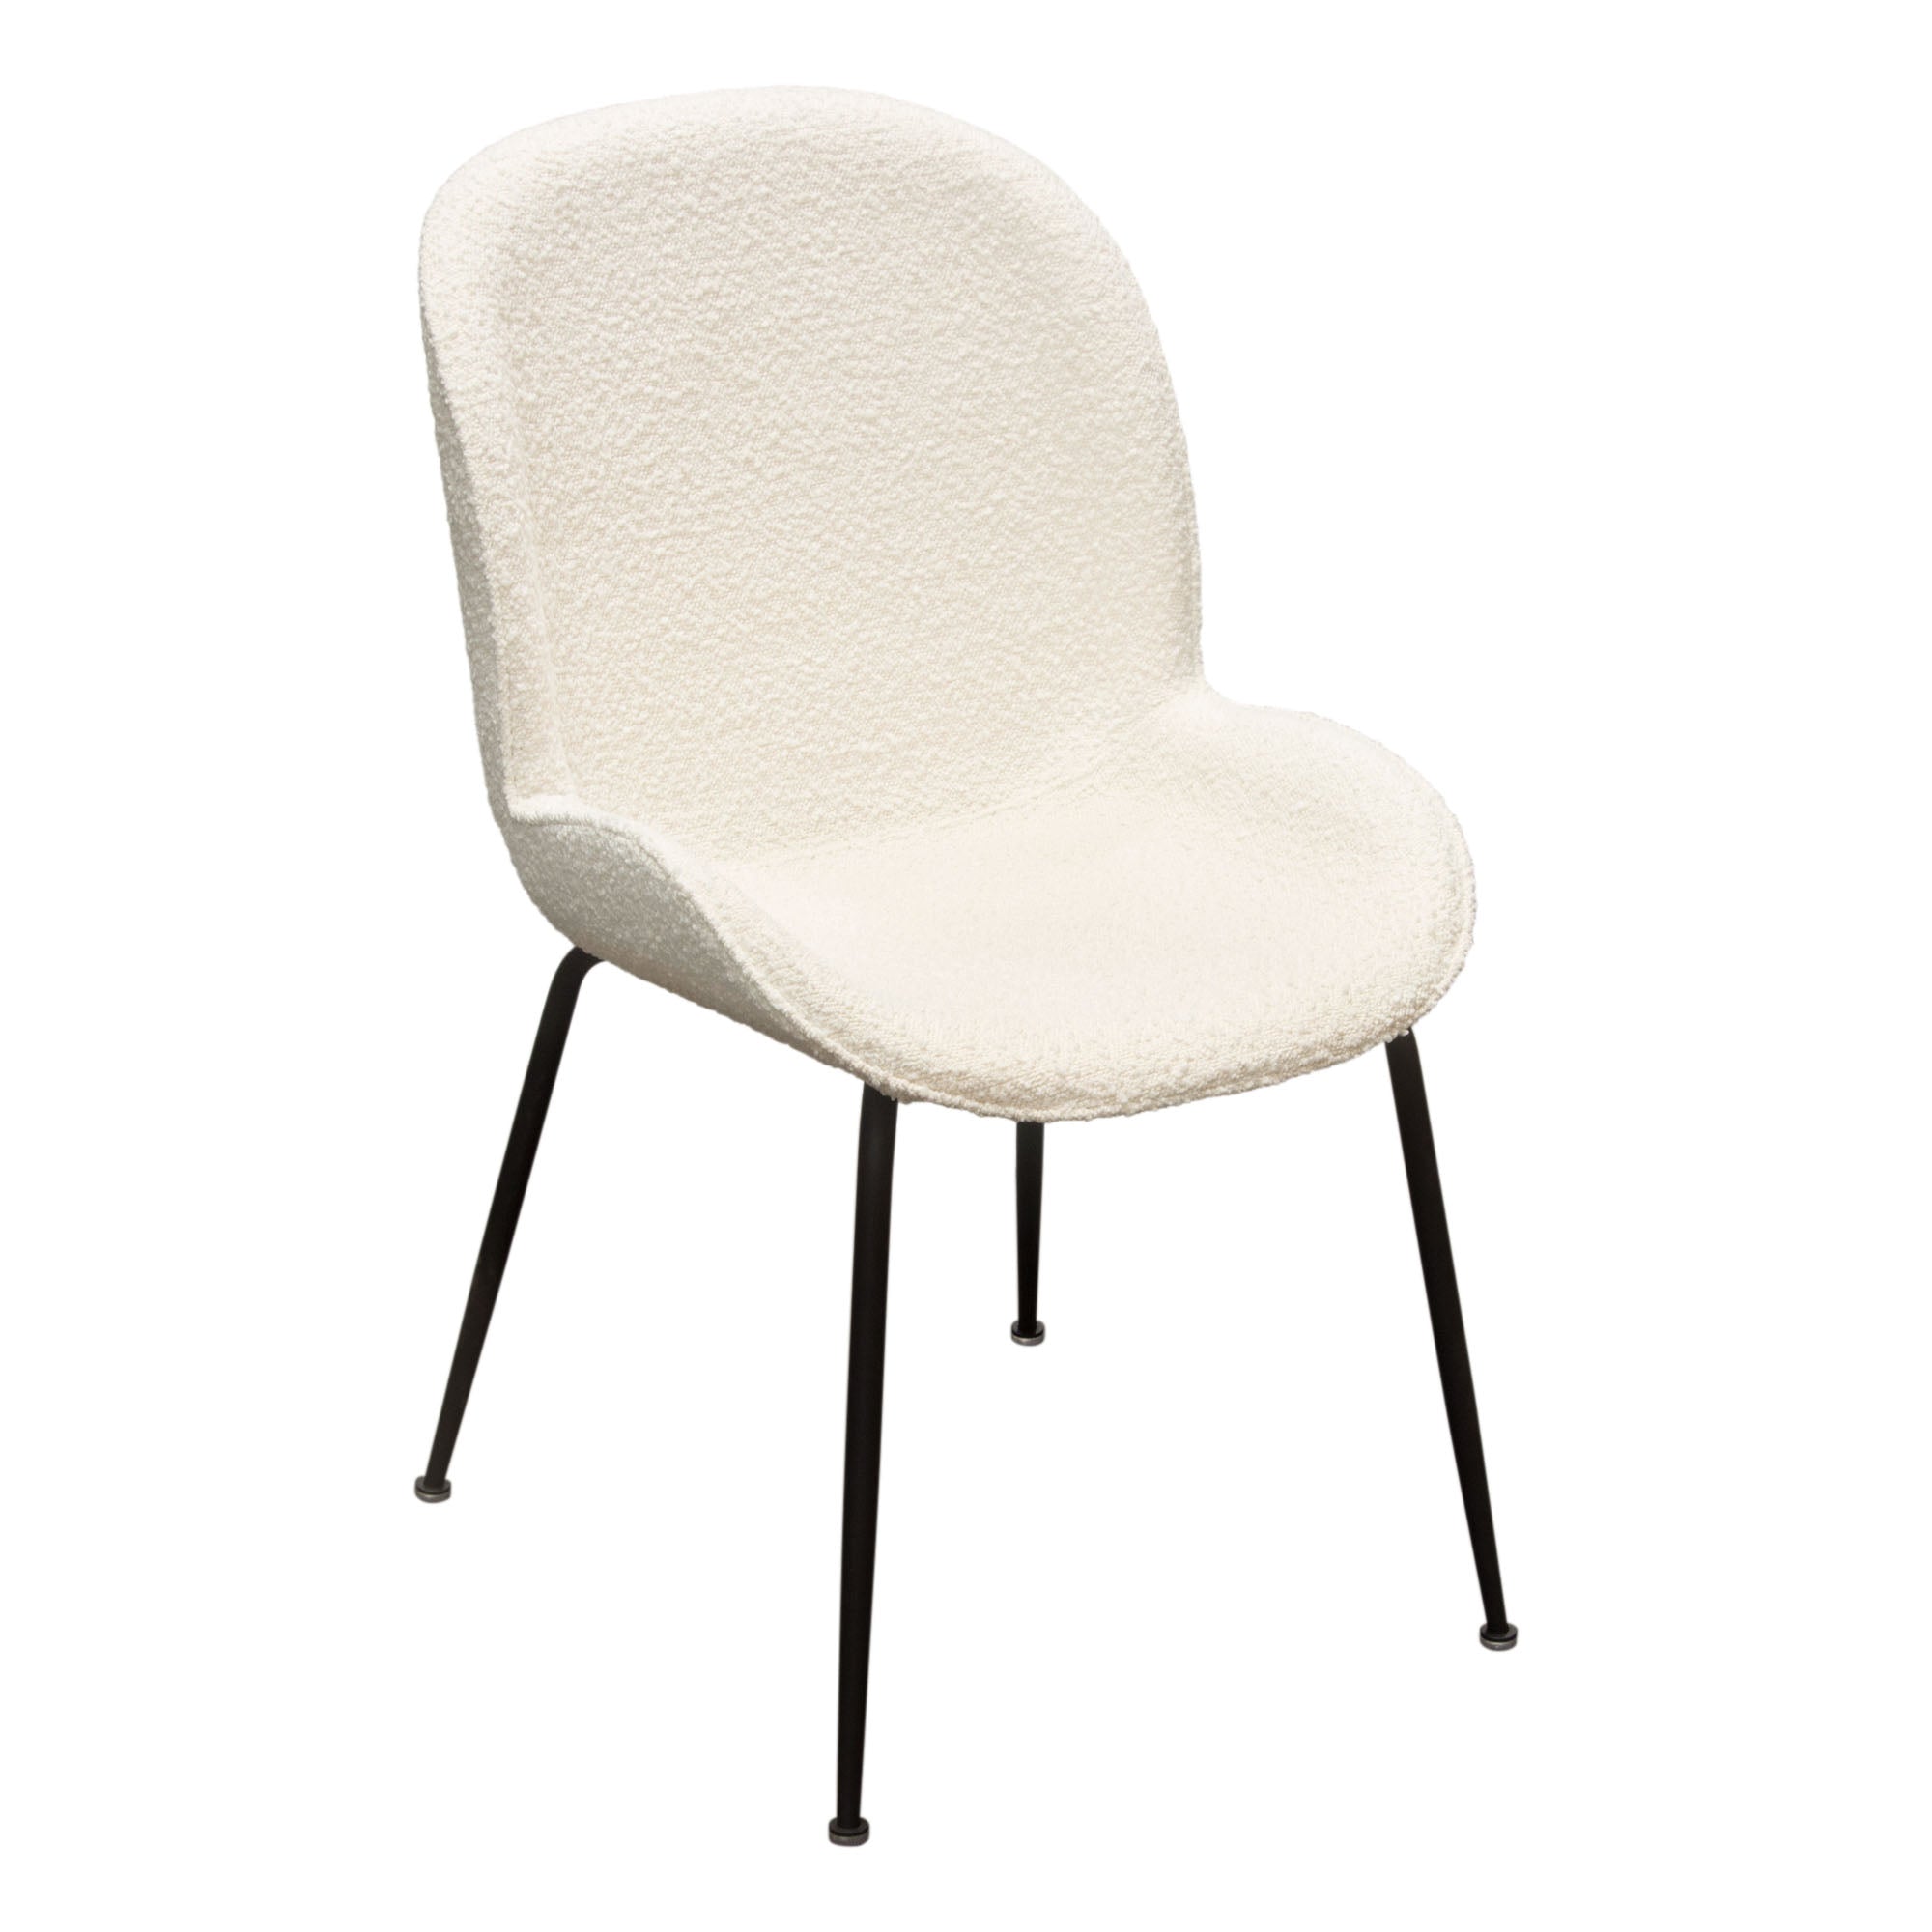 SESSION DINING CHAIR IN IVORY BOUCLE - SET OF 2